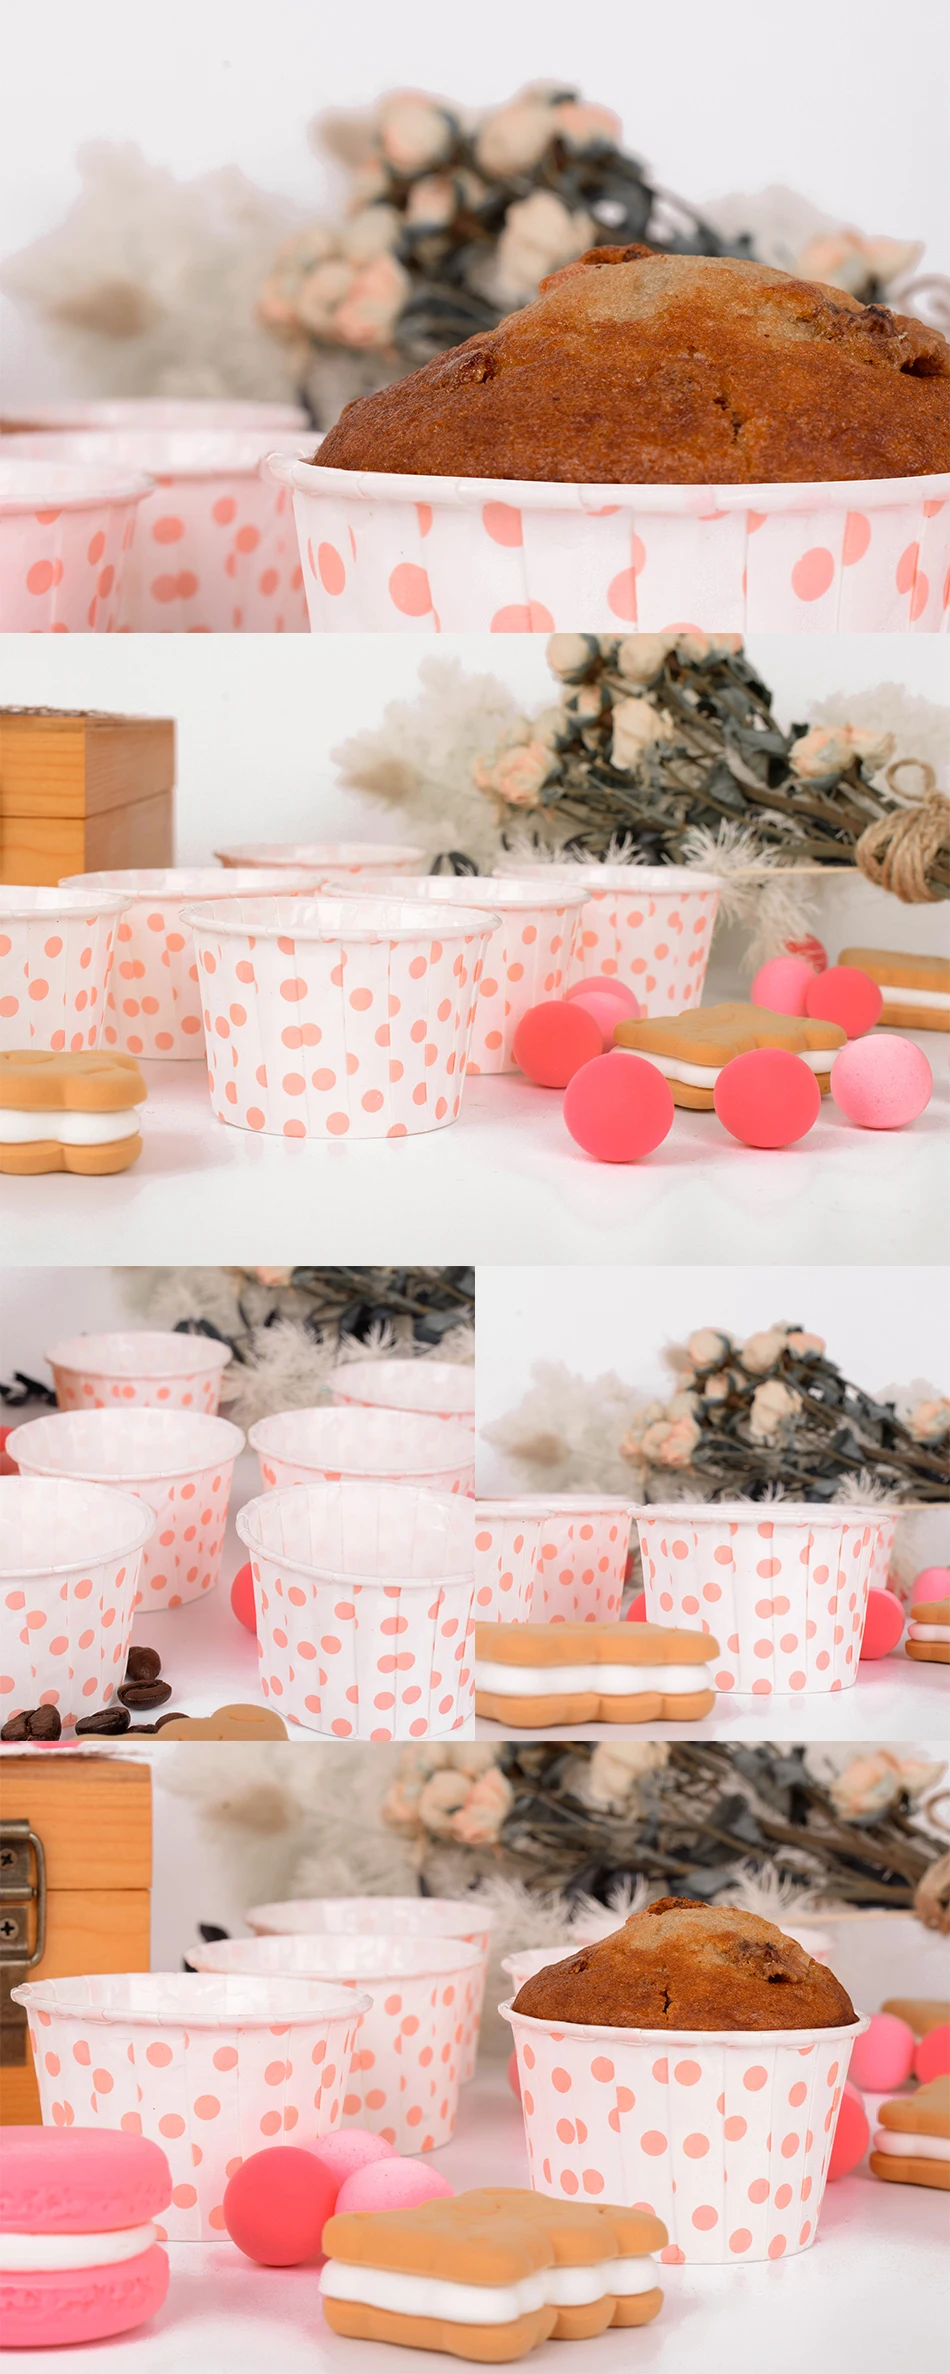 48pcs cupcake liner baking cup cupcake paper muffin cases Cake box Cup egg tarts tray cake mould decorating tools